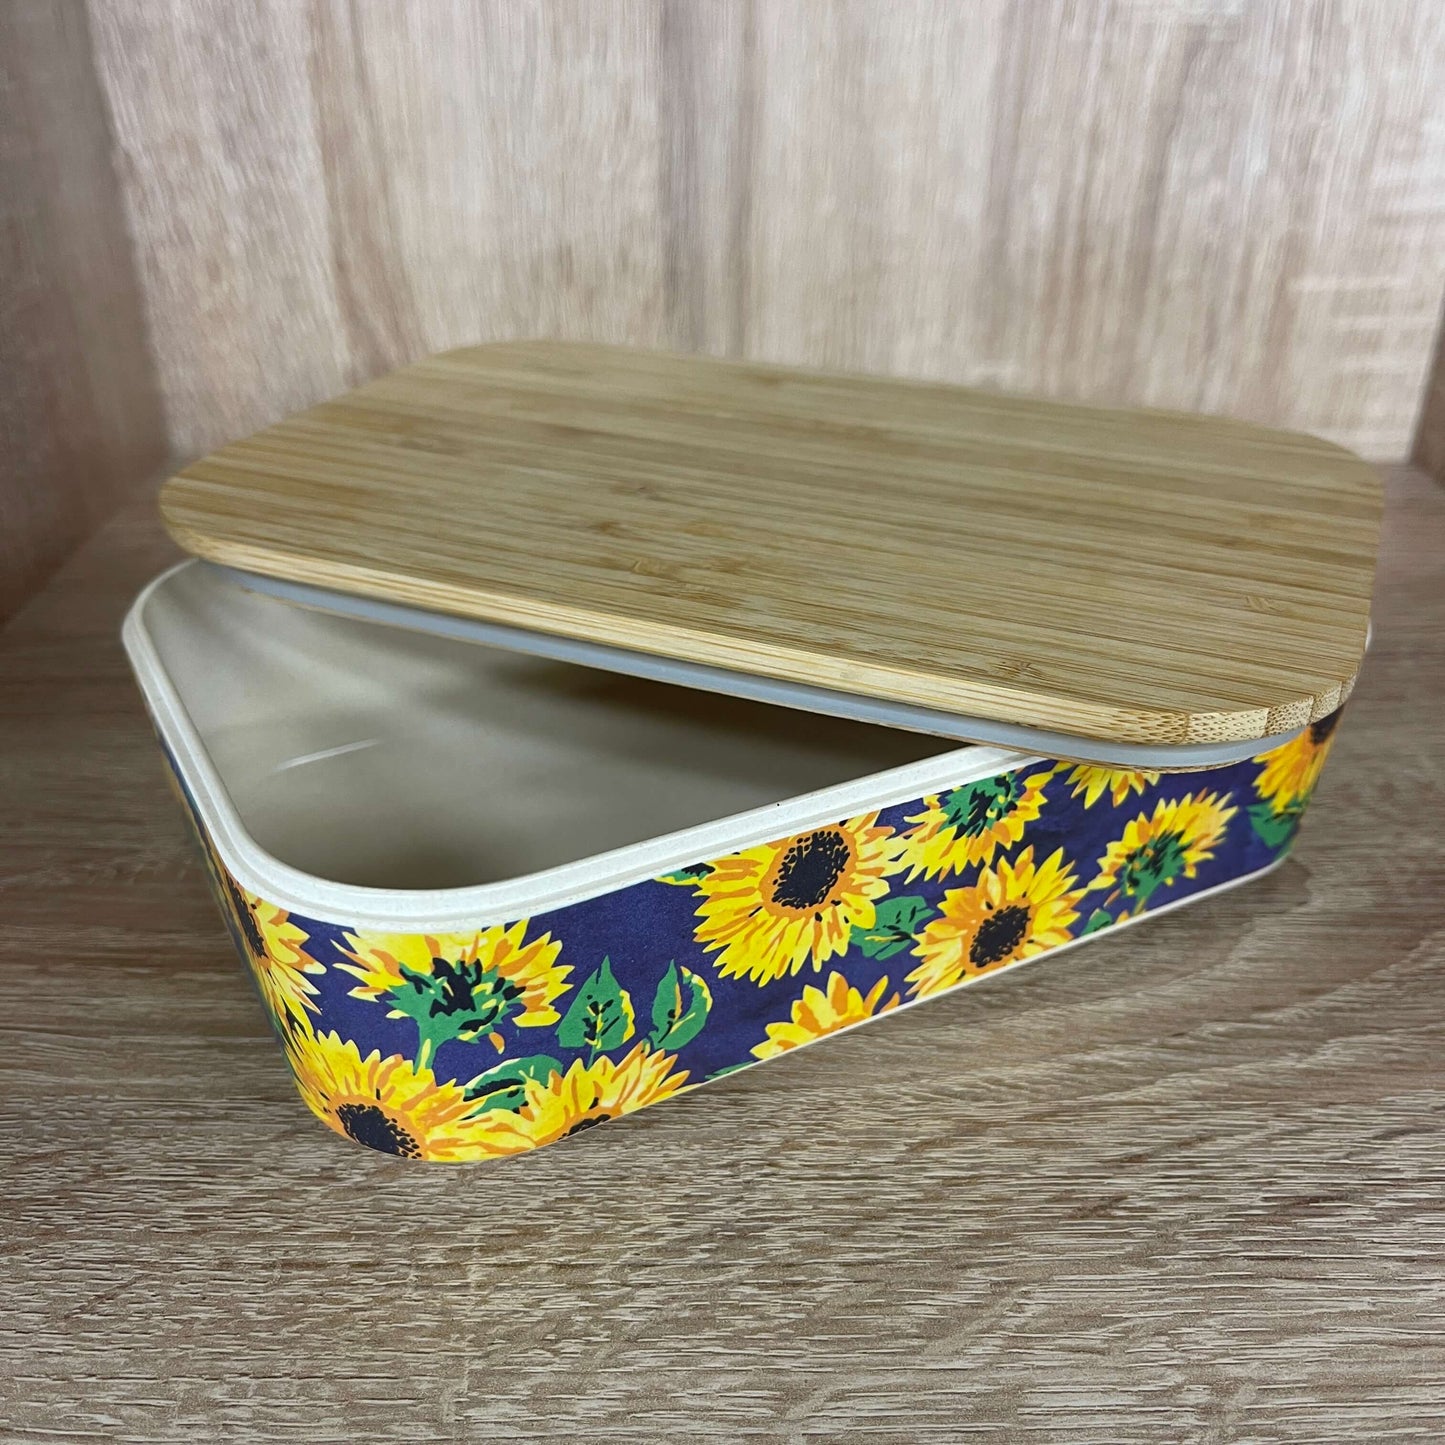 Bamboo lunchbox with sunflower print and blue silicone band.